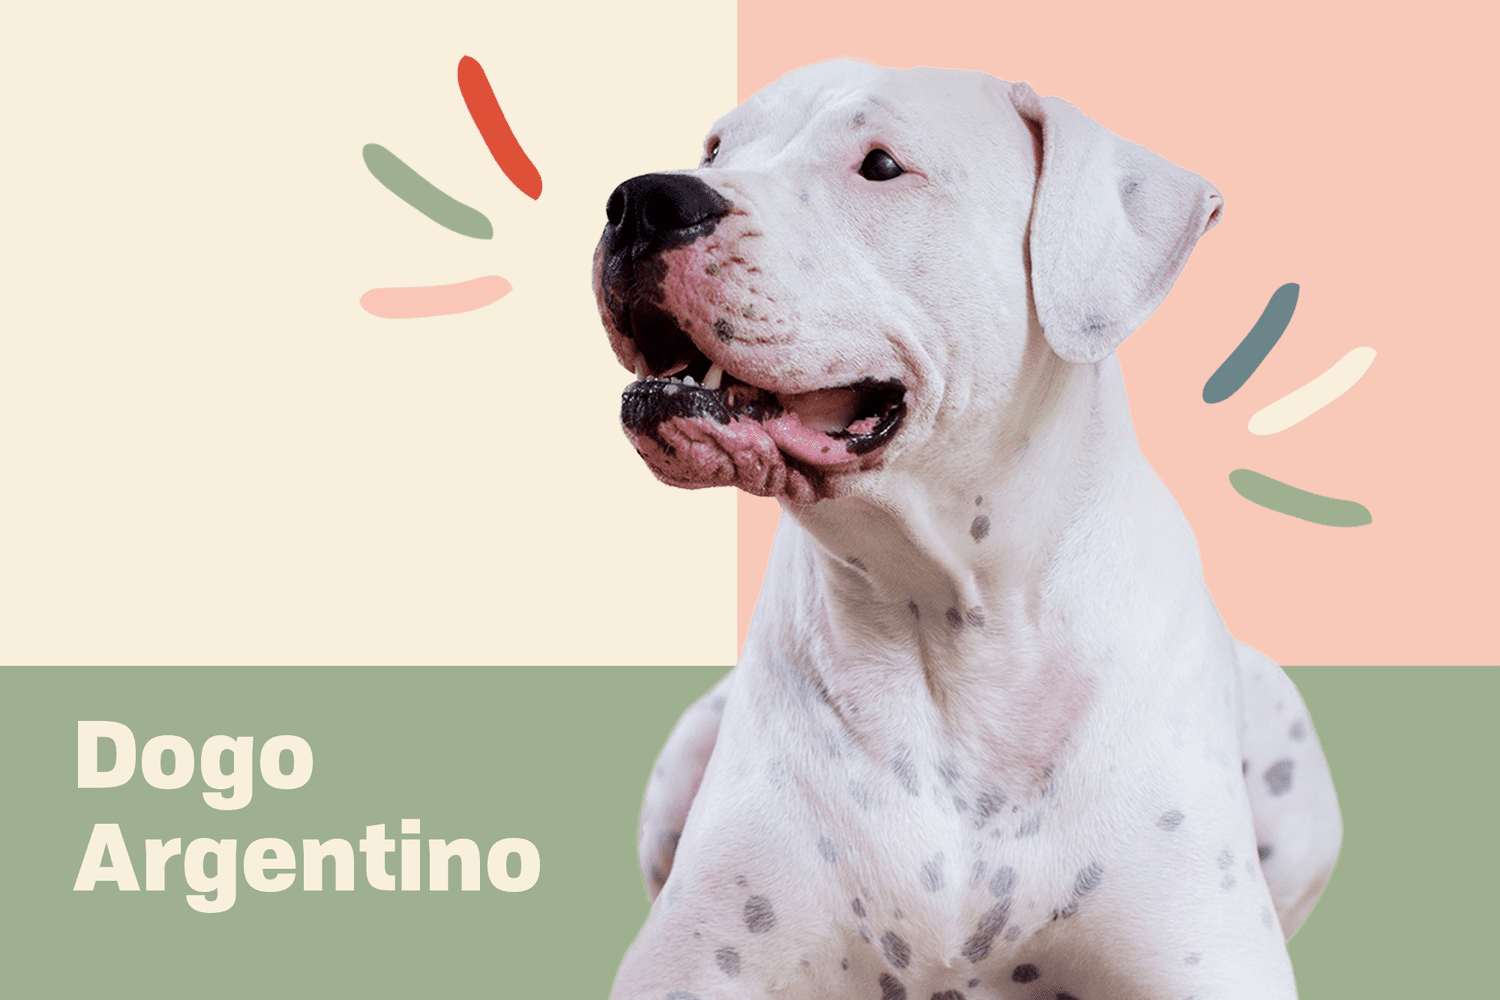 are dogo argentinos good dogs